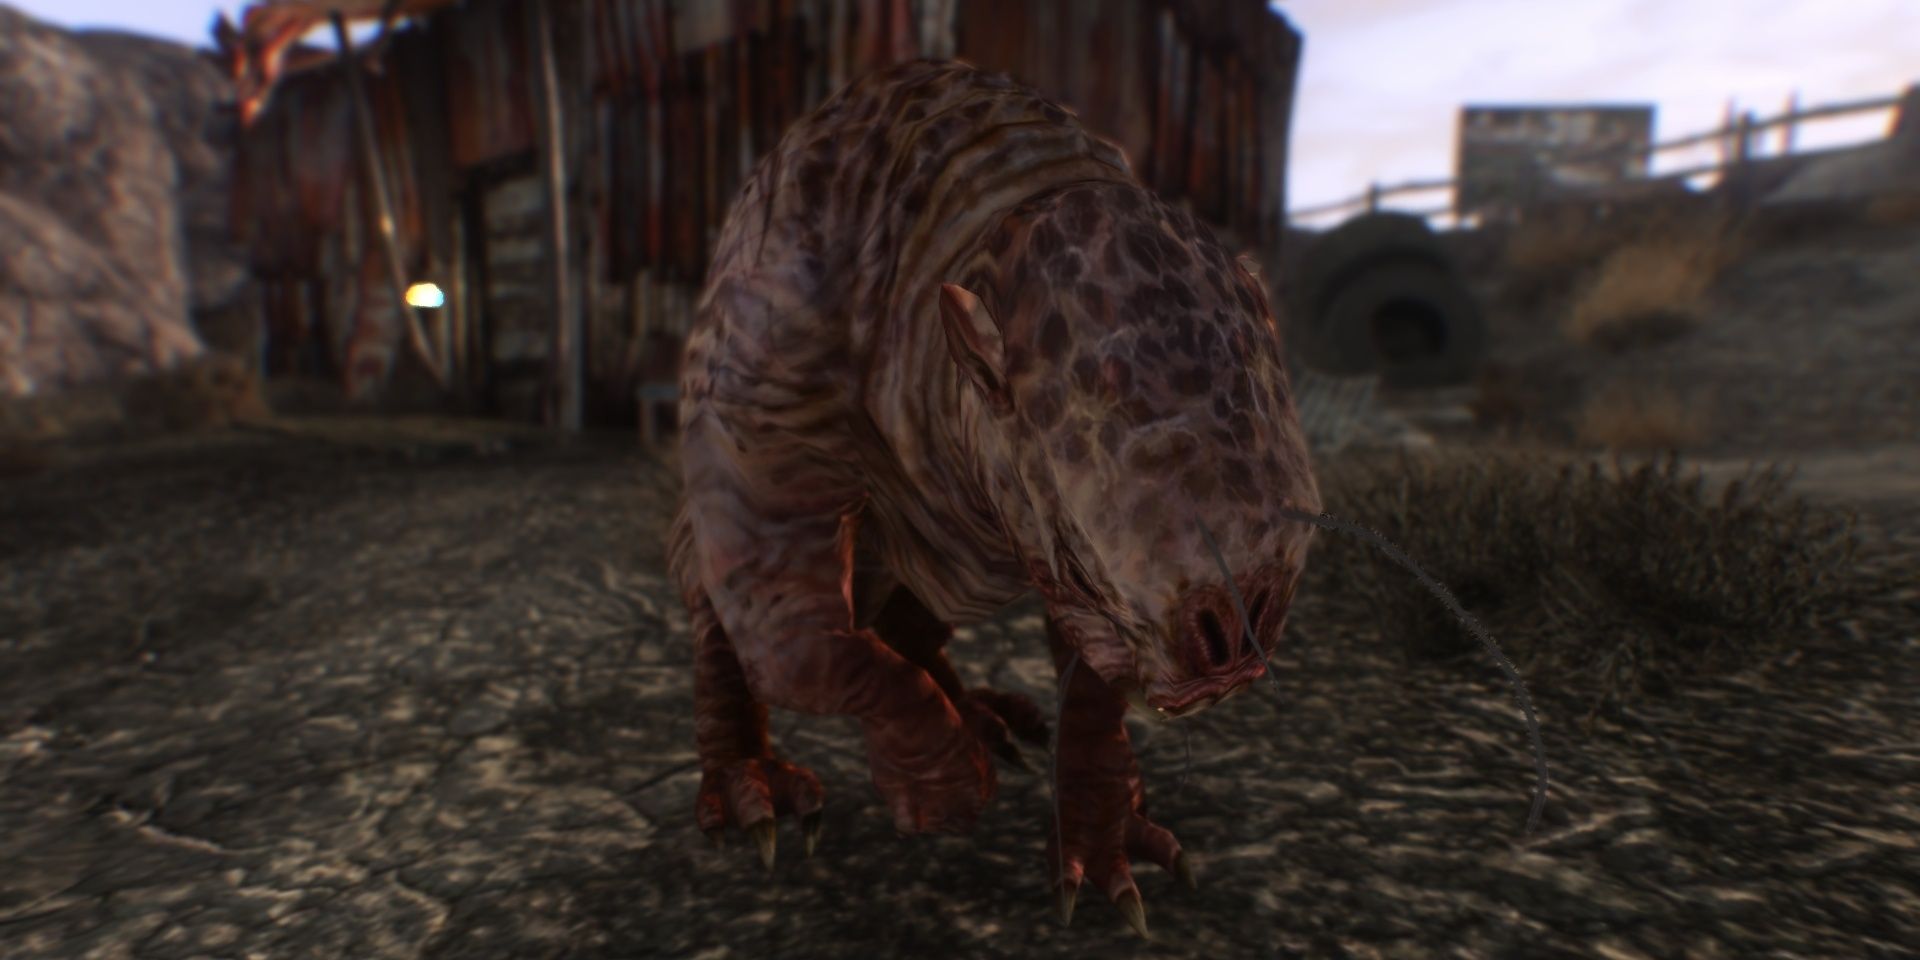 Snuffles The Mole Rat From Fallout New Vegas